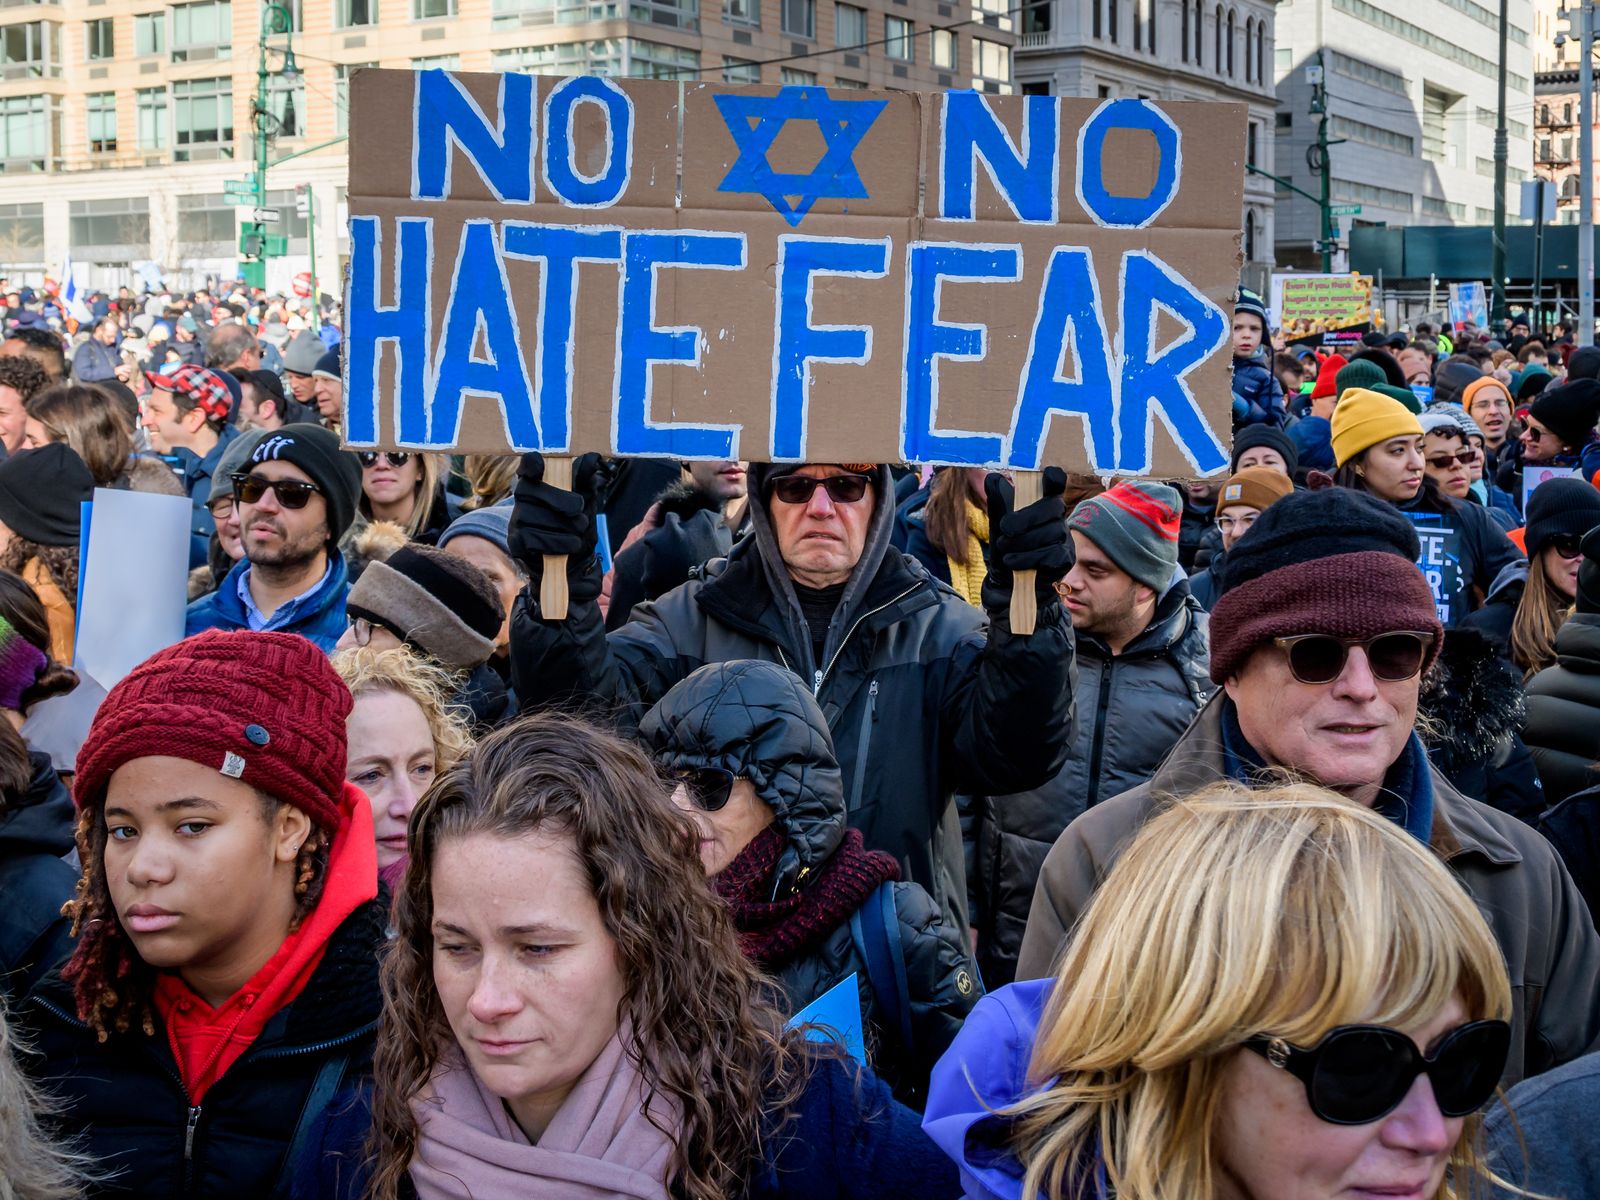 Anti-Defamation League, ADL: Antisemitic Incidents in New Jersey Reach  Highest Levels Ever Recorded in 2021